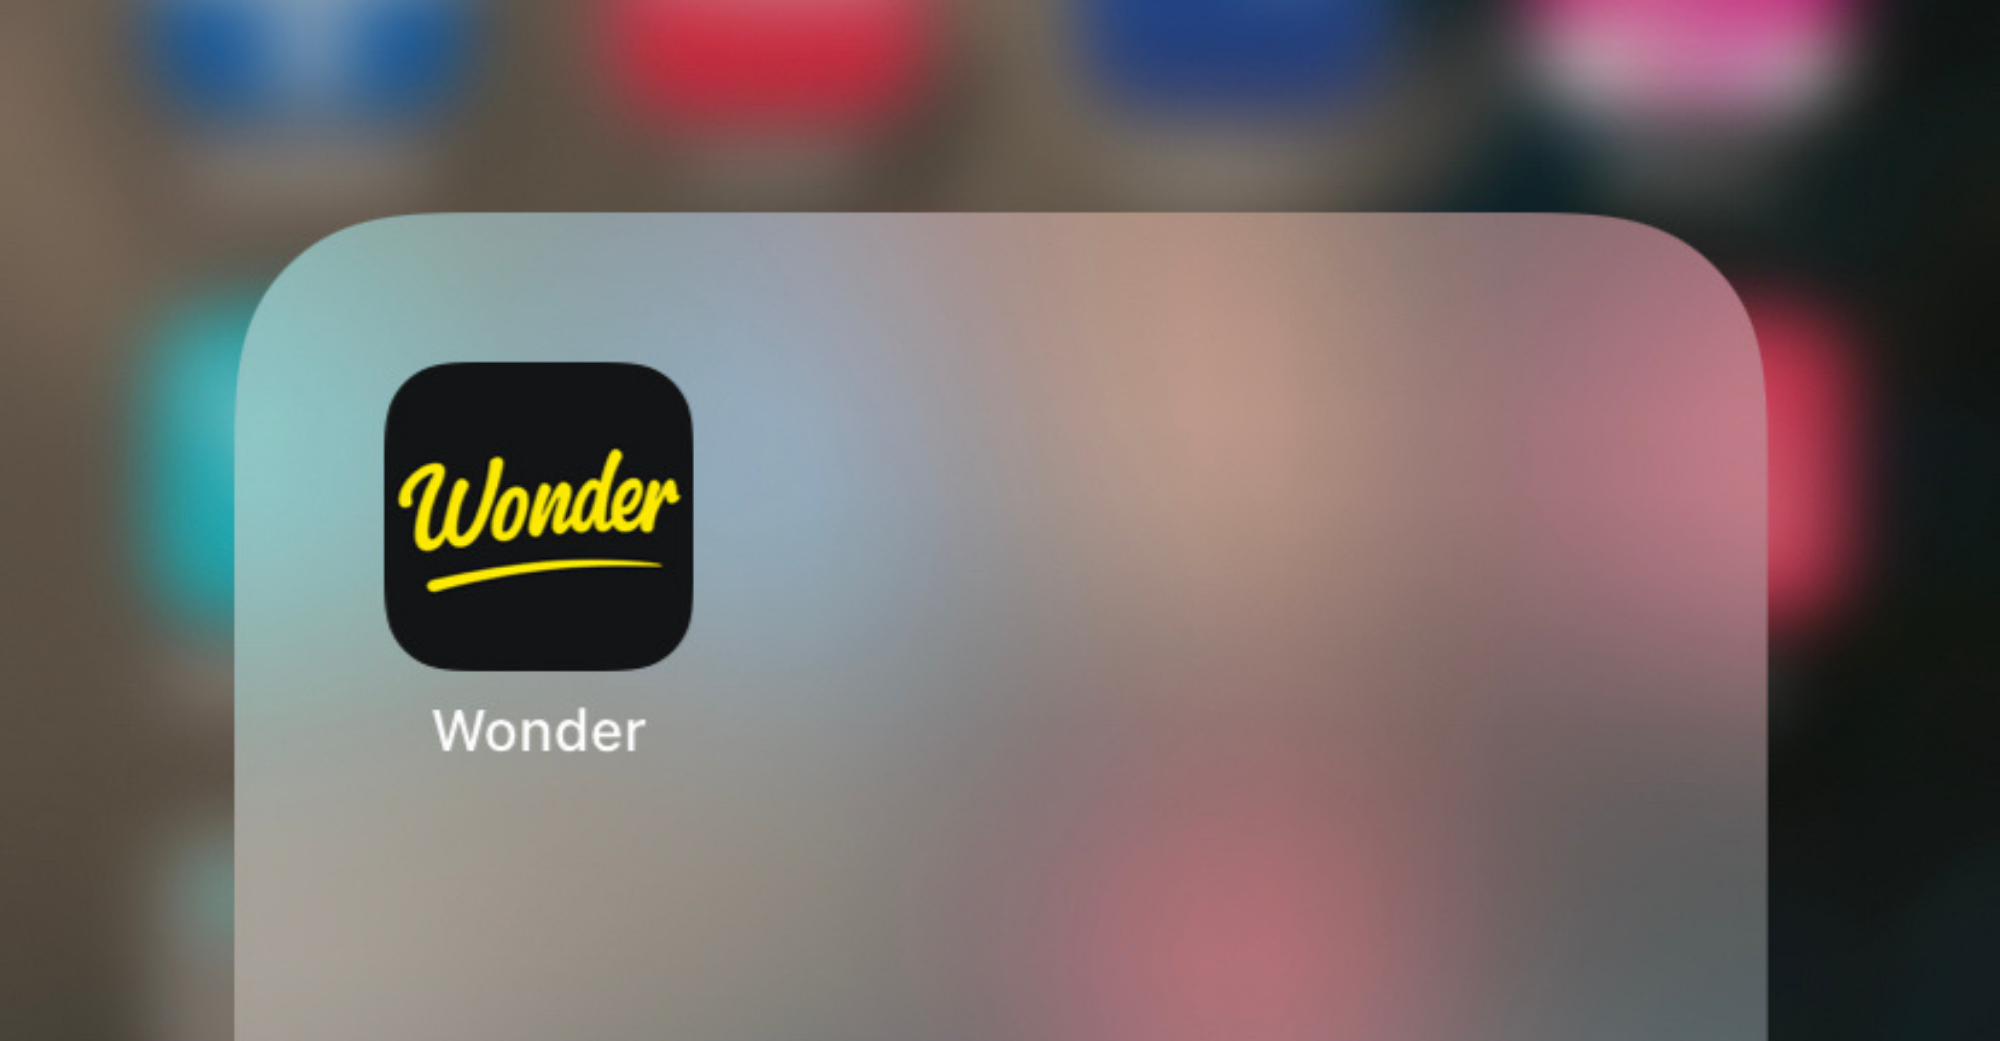 Baidu Released the “Wonder” App for Youth as an Information Service Platform